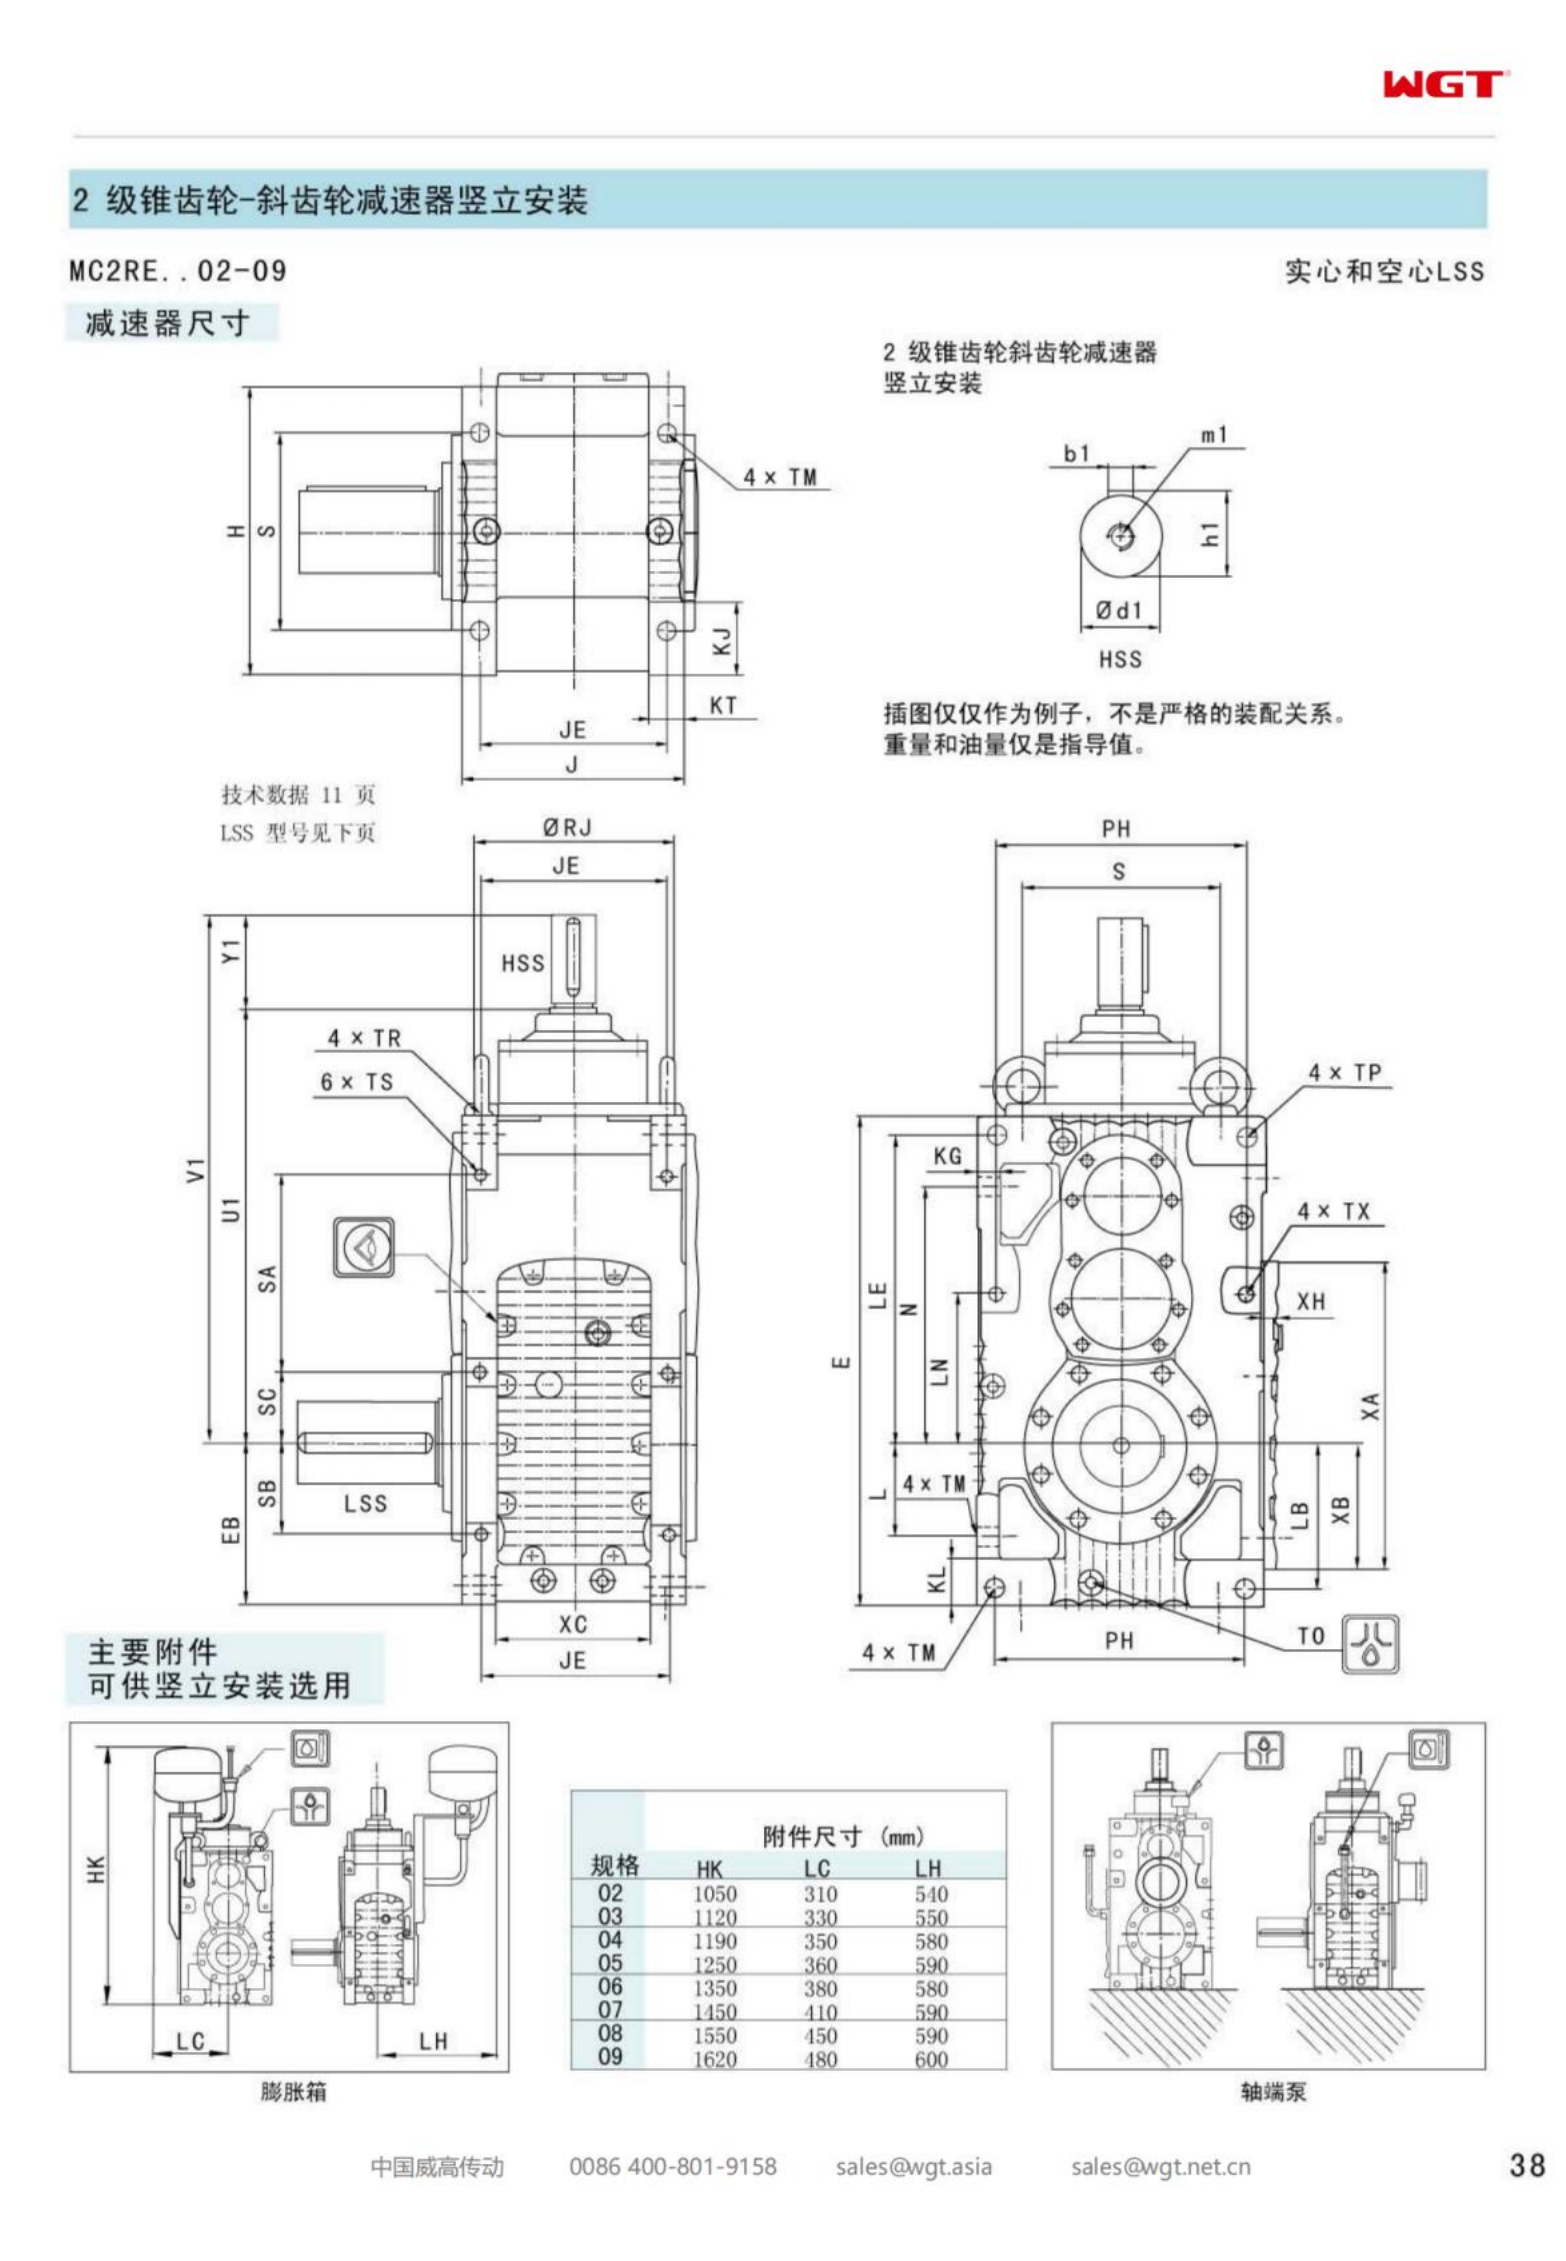 MC2RESF07 replaces _SEW_MC_Series gearbox (patent)